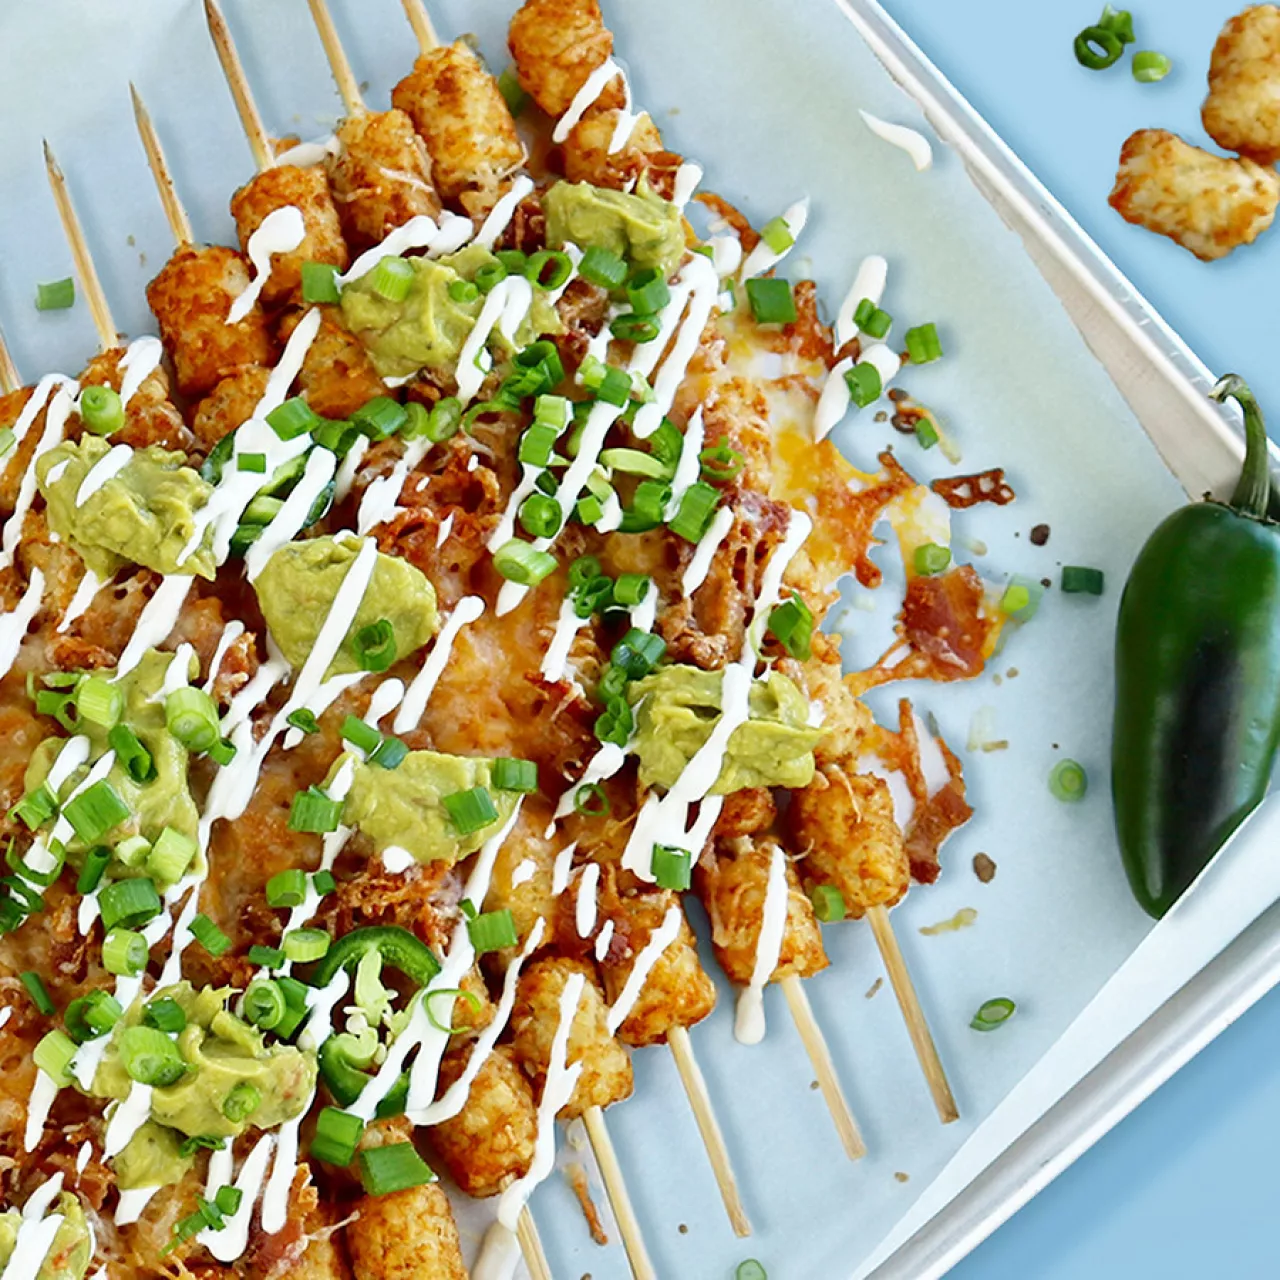 WHOLLY® Loaded Tater Tot Kabobs –Think of it as the portable potato skin dish you never knew you always needed. Easy to build and so fun to enjoy as you cheer for your favorite team. img#2